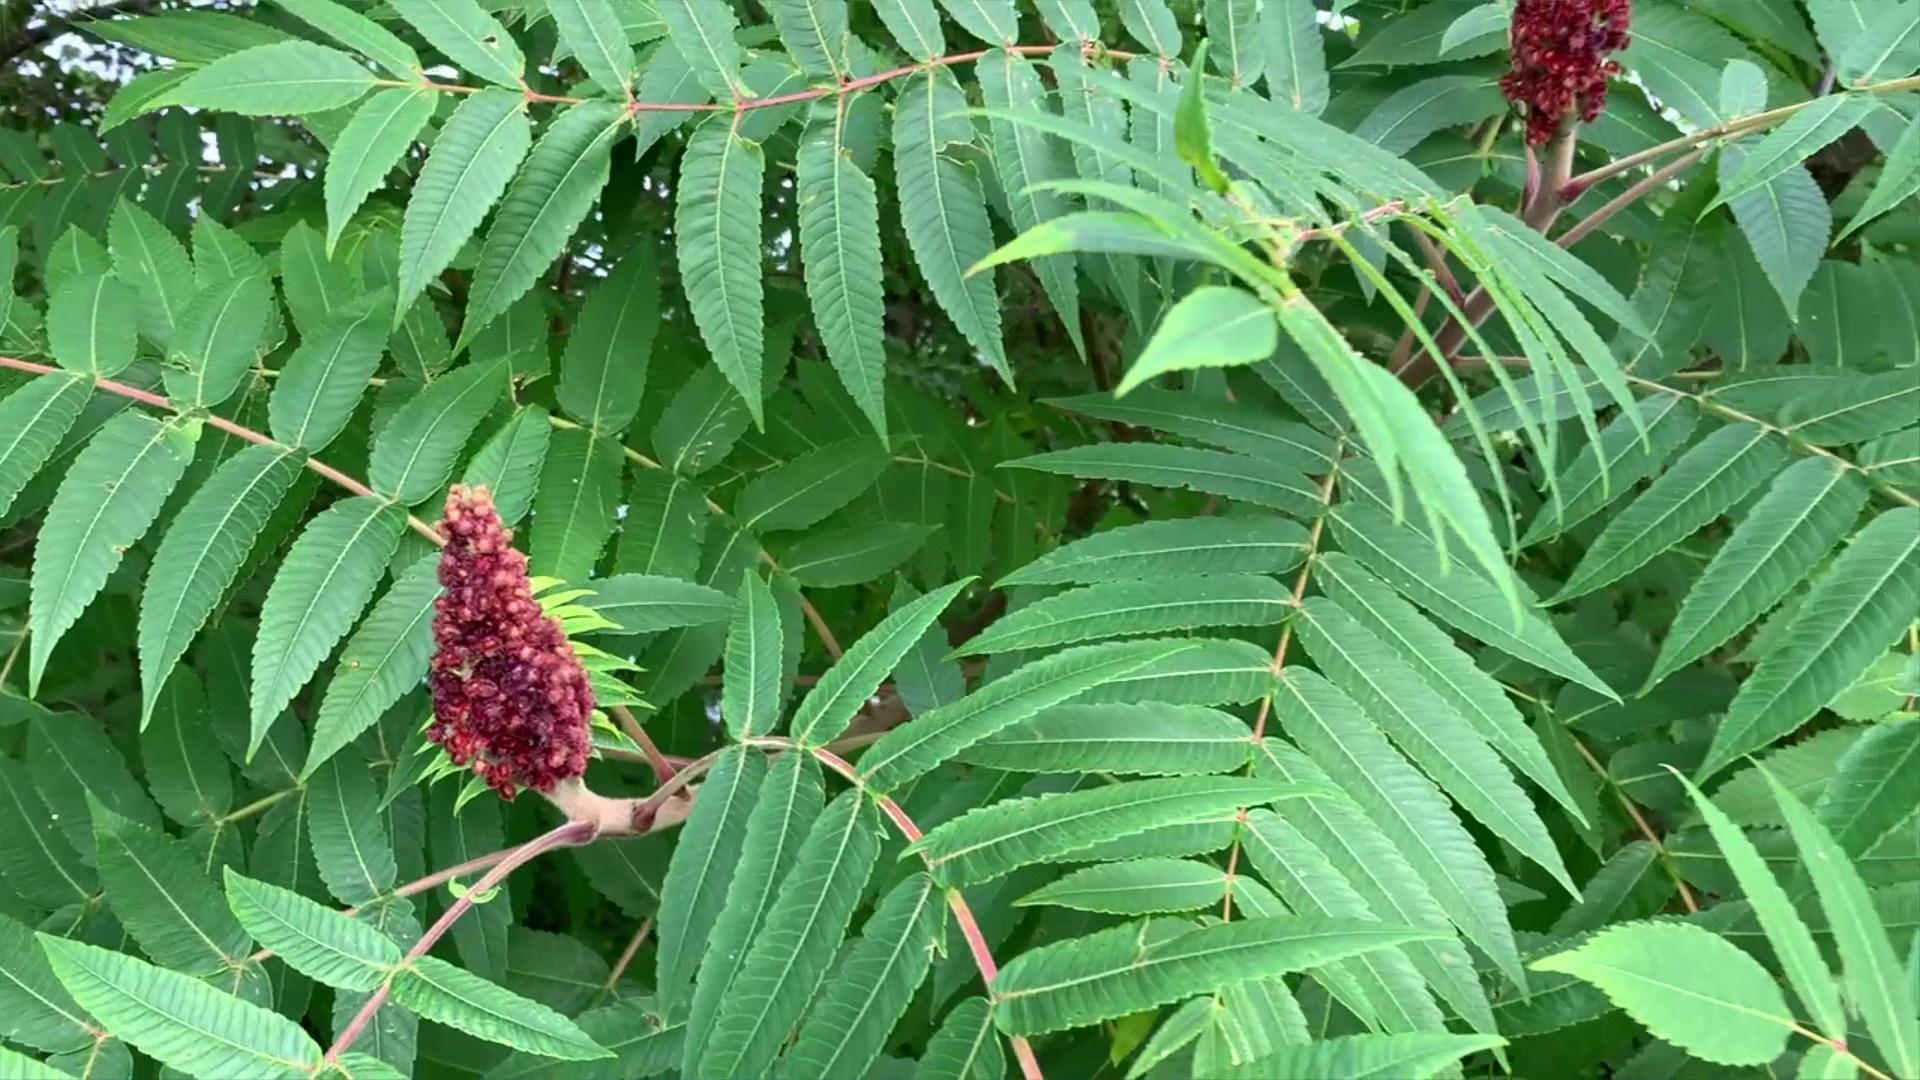 Outdoor Elements, Sumac - Poison or Not?